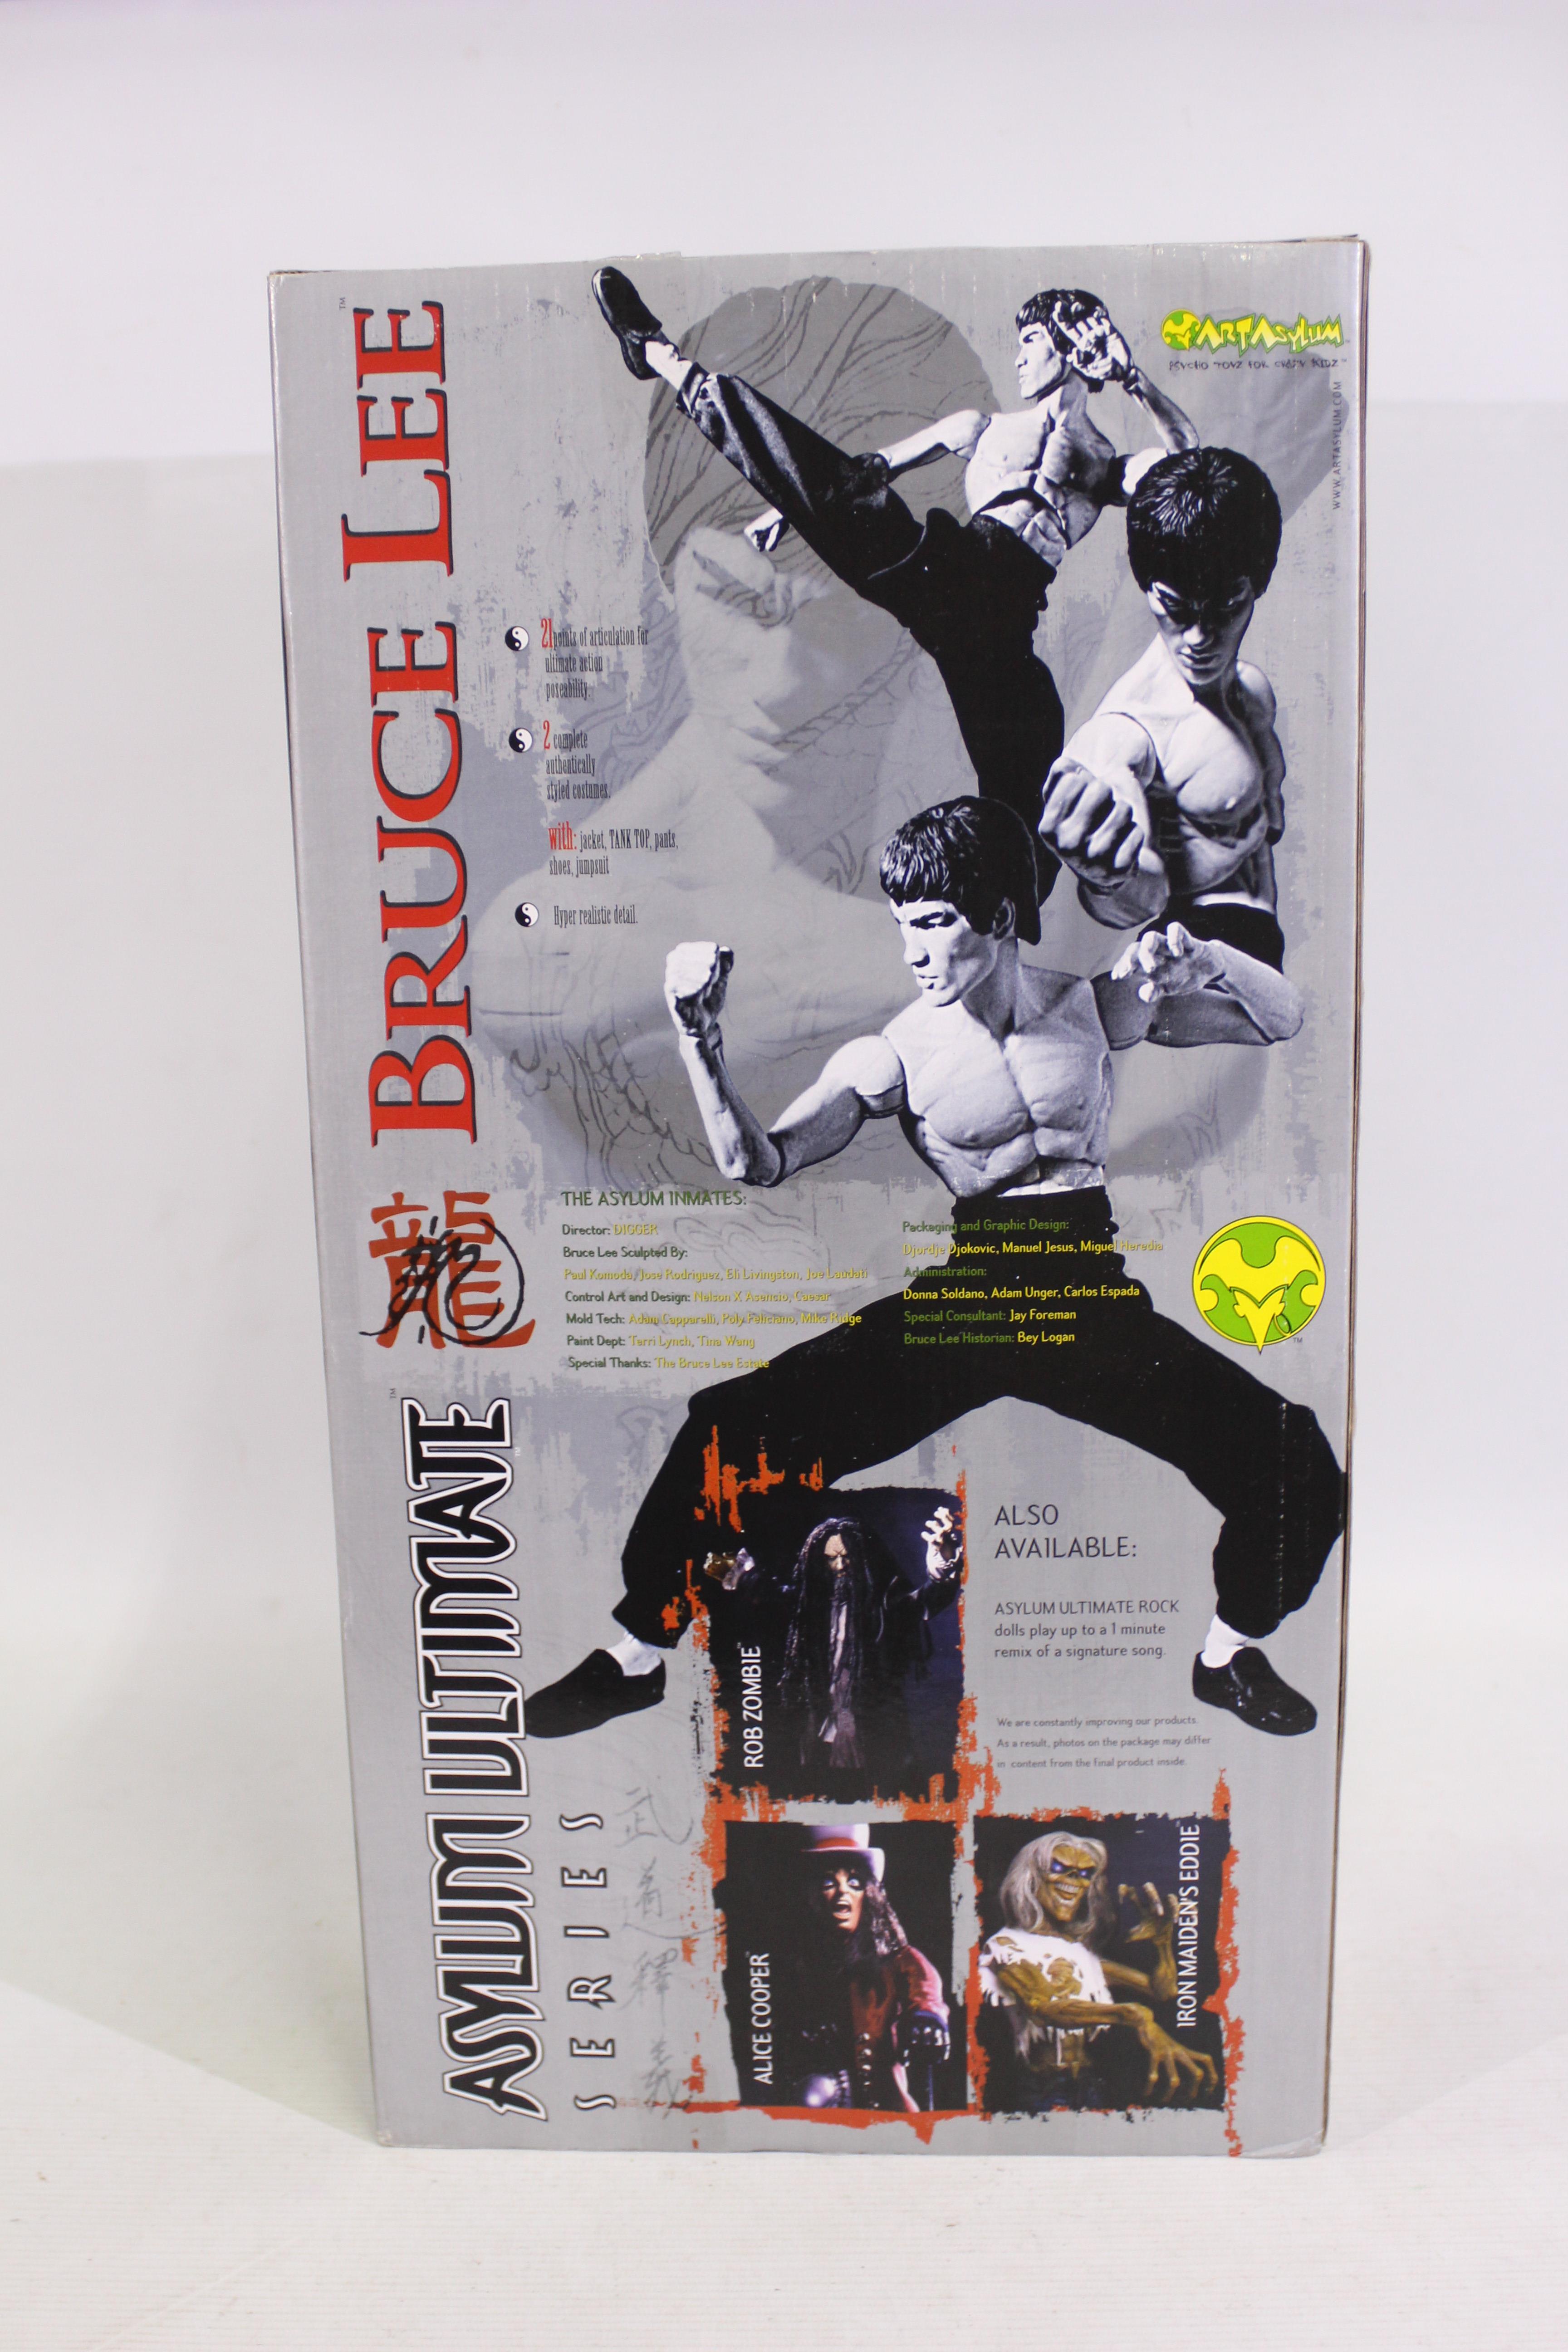 Art Asylum - A boxed Art Asylum Ultimate Series Bruce Lee figure - The #75300 figure comes in a - Image 4 of 5